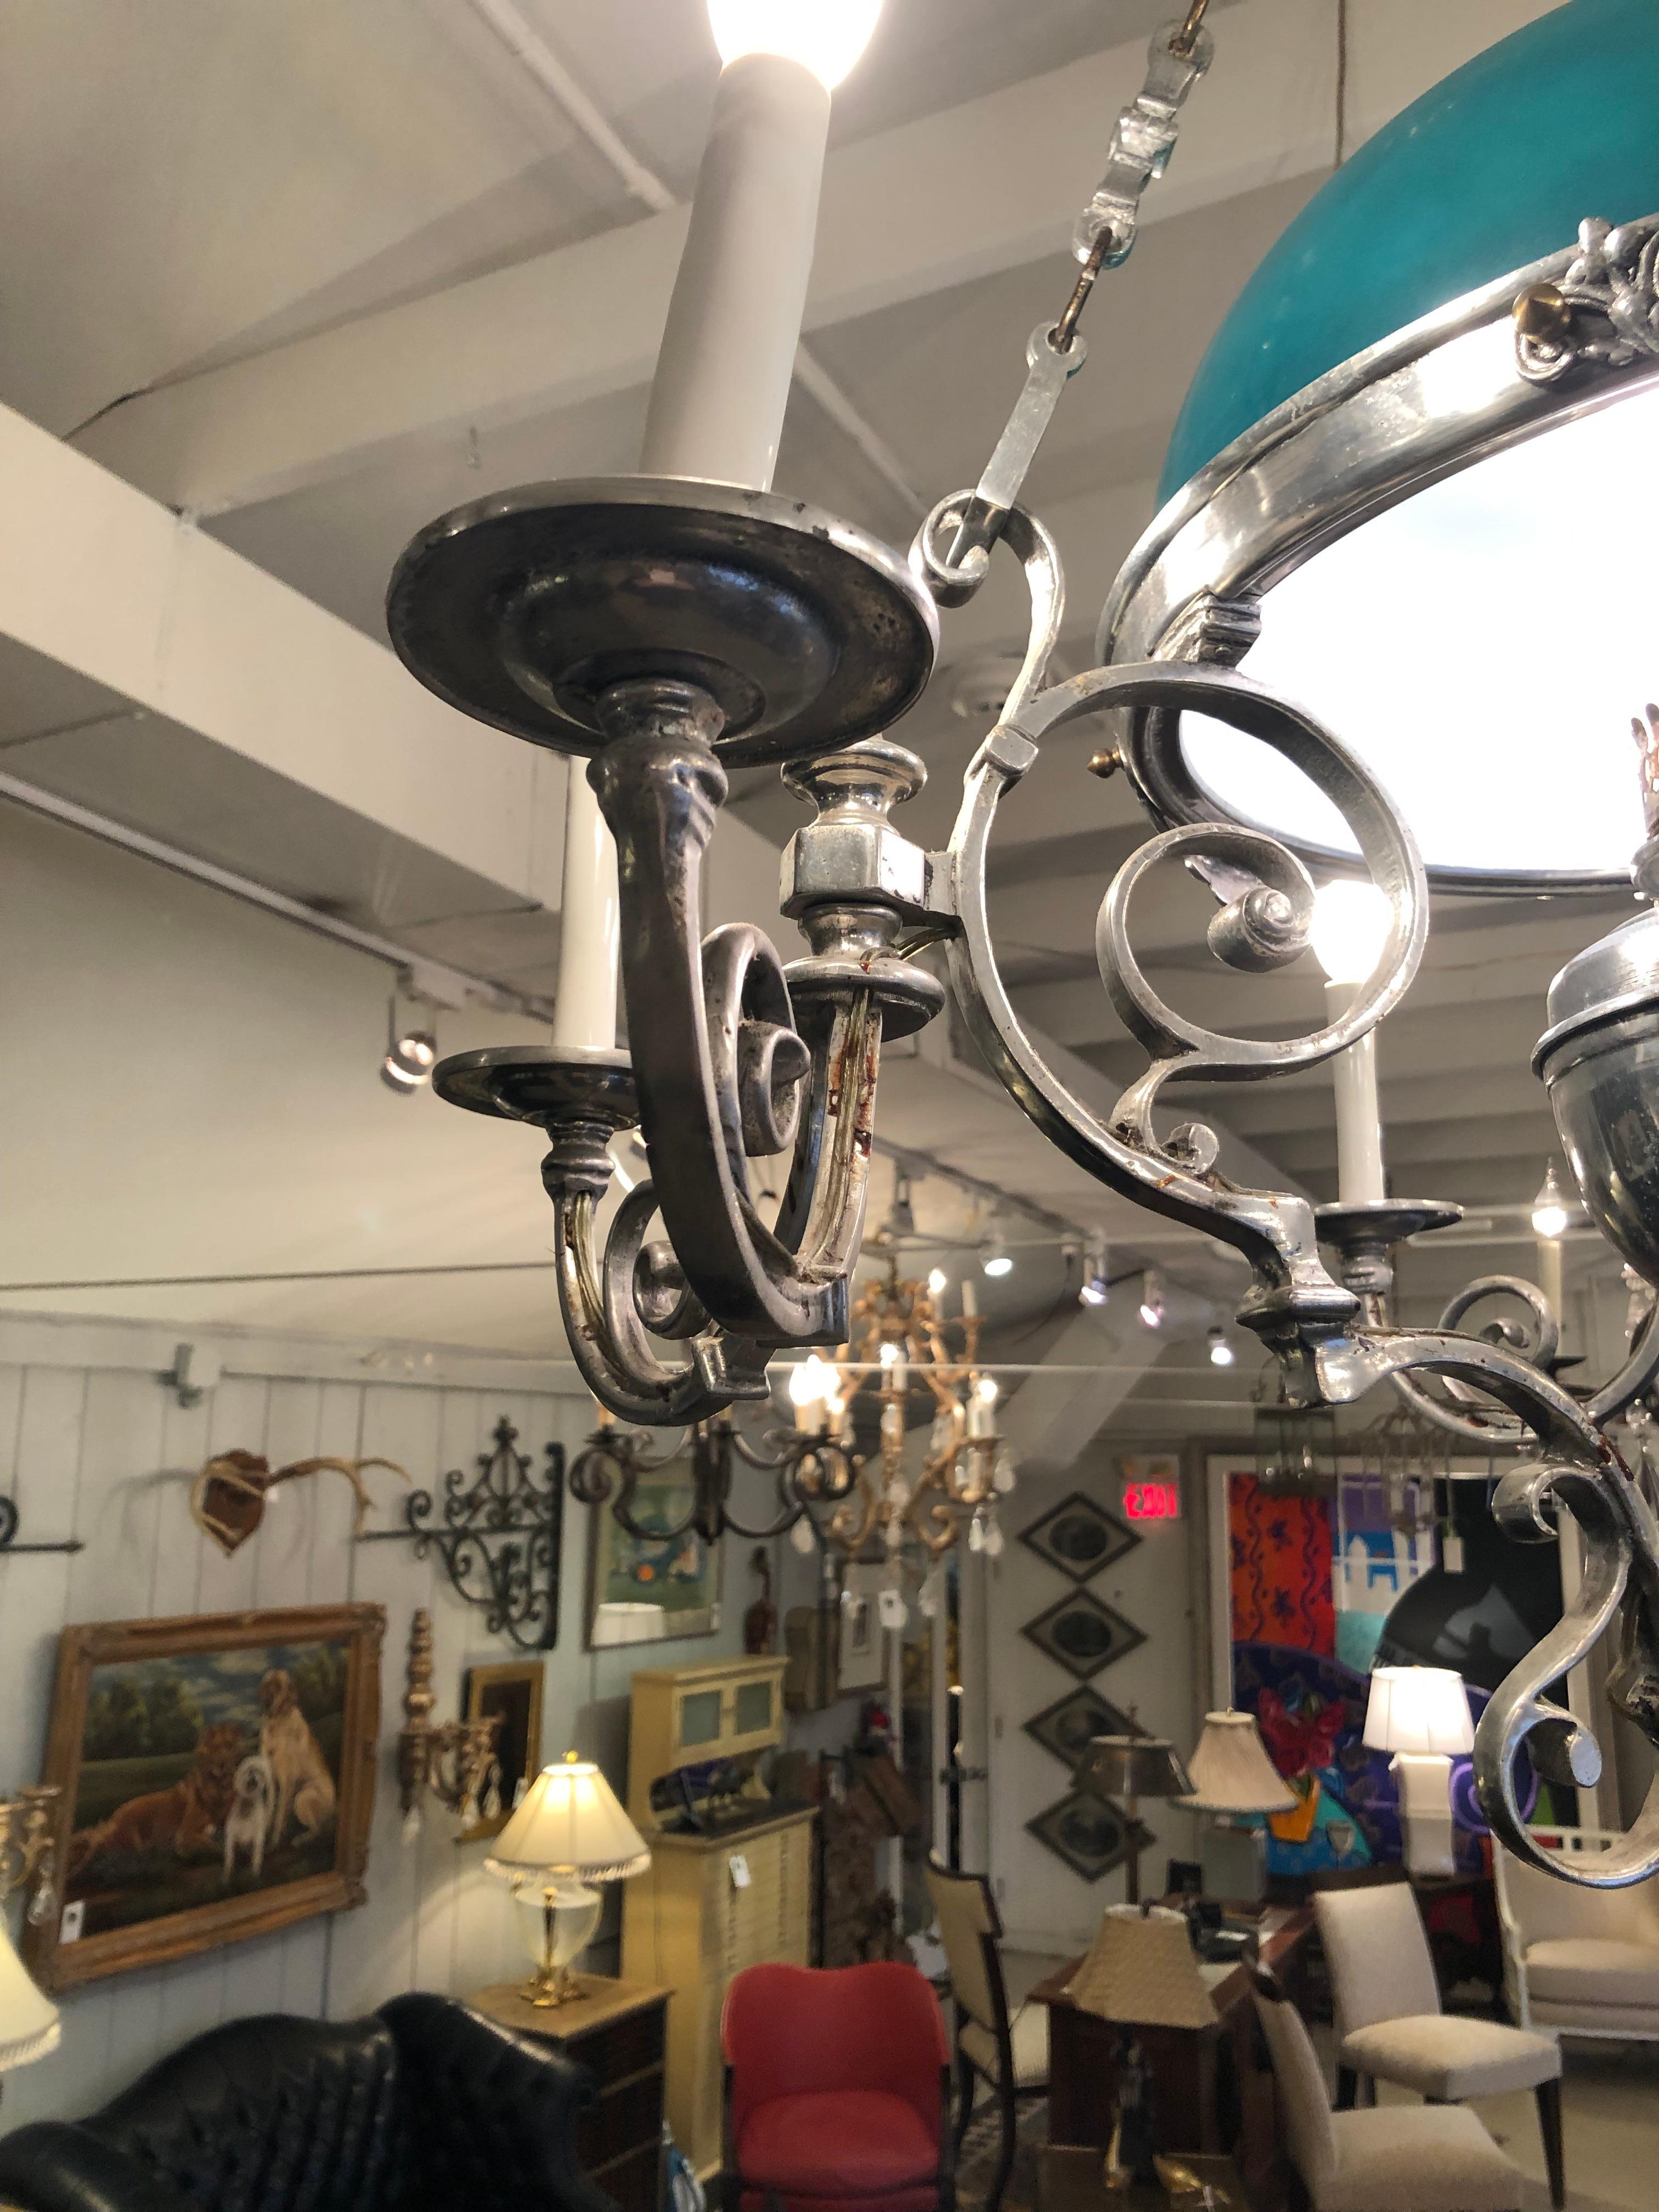 Impressive large antique pewter and green opaque glass domed chandelier that was once a period gas lamp having 6 lights, fancy curlicue arms, and beautiful figural decoration around the periphery.

Jones